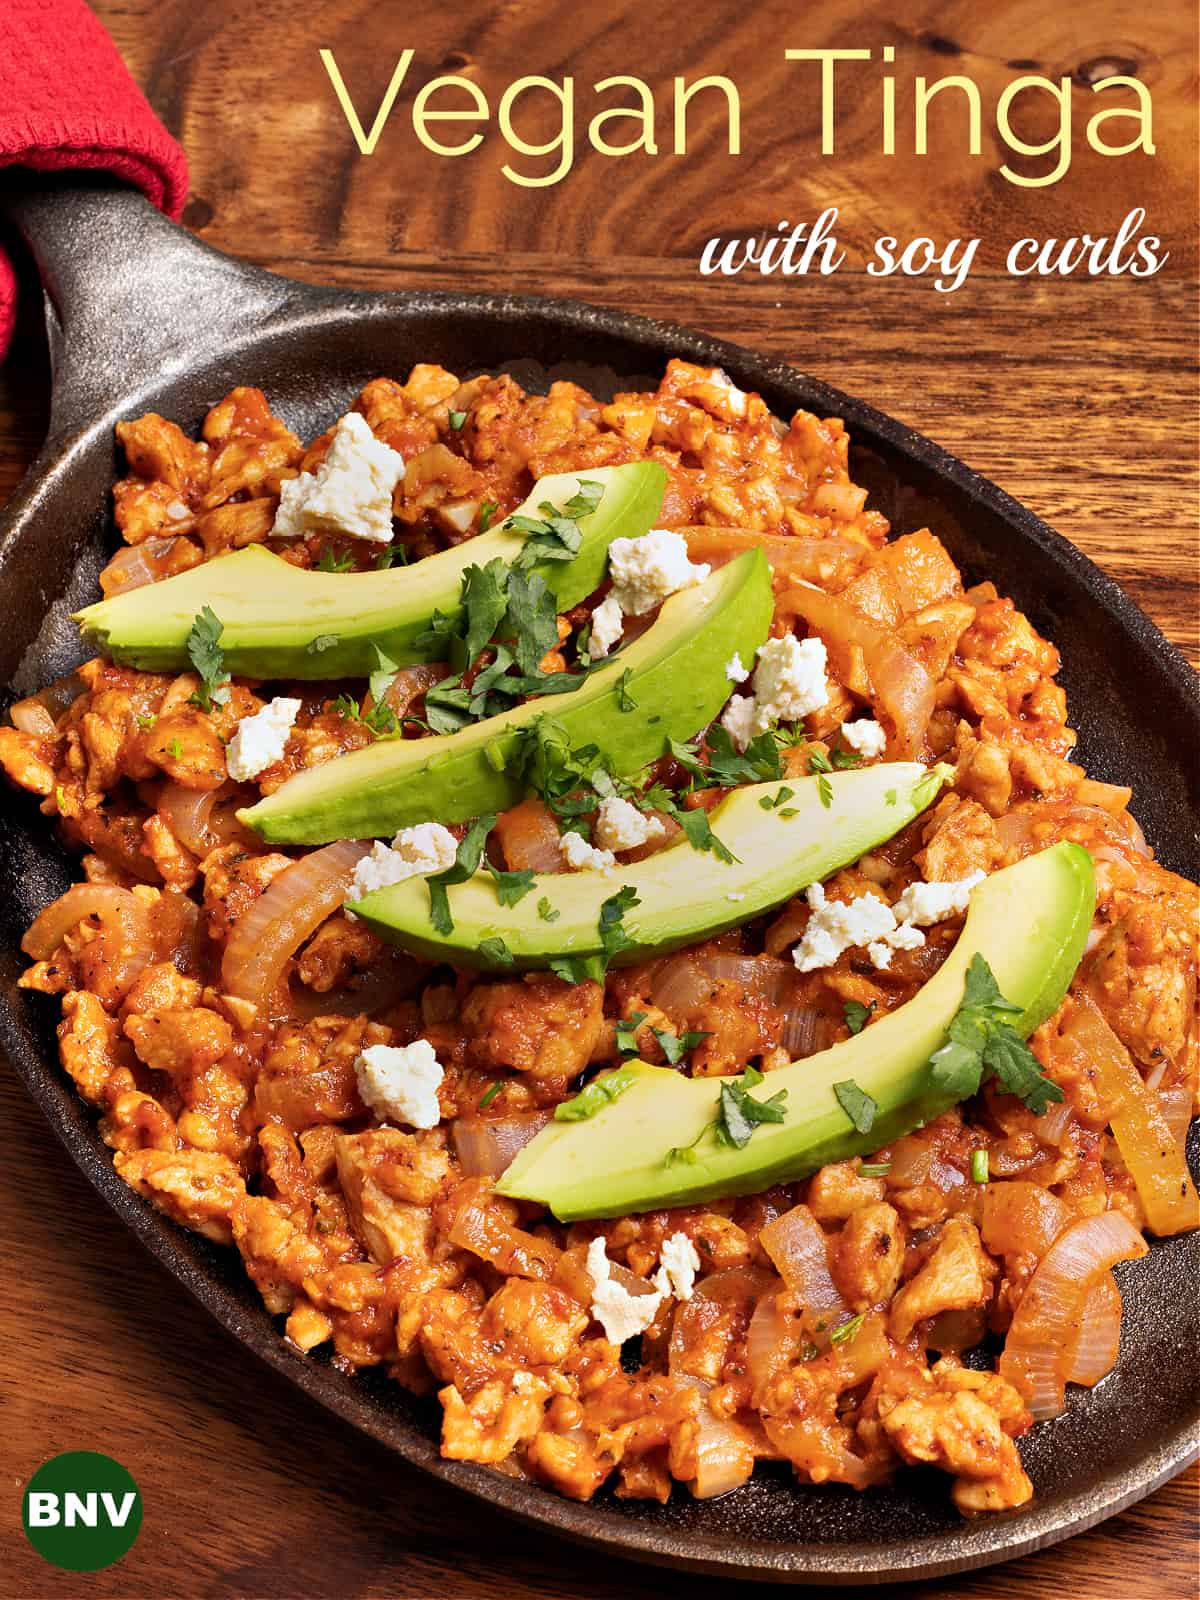 Pinterest photo of my vegan soy curl tinga with avocado slices